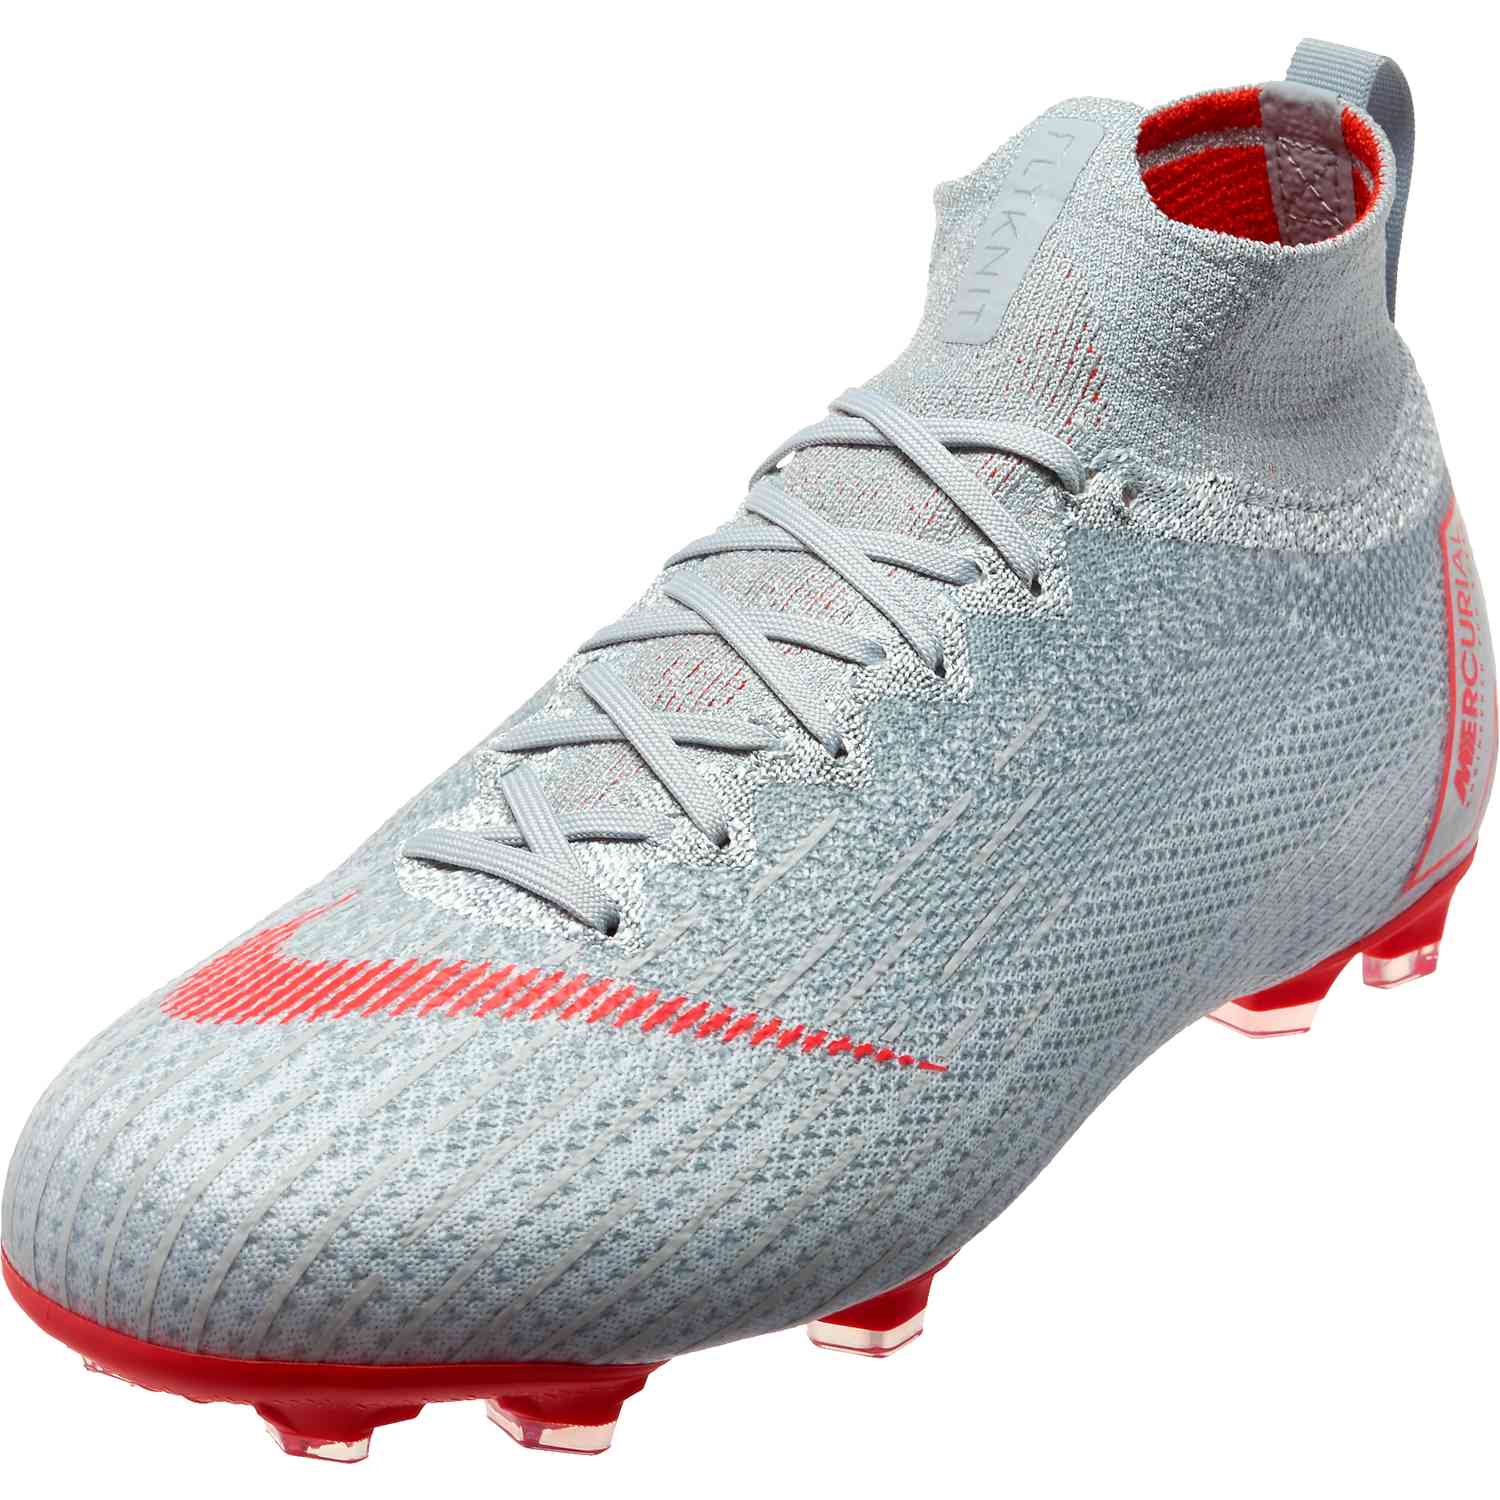 Details about Nike Mercurial Superfly 6 Elite FG Soccer Cleats.